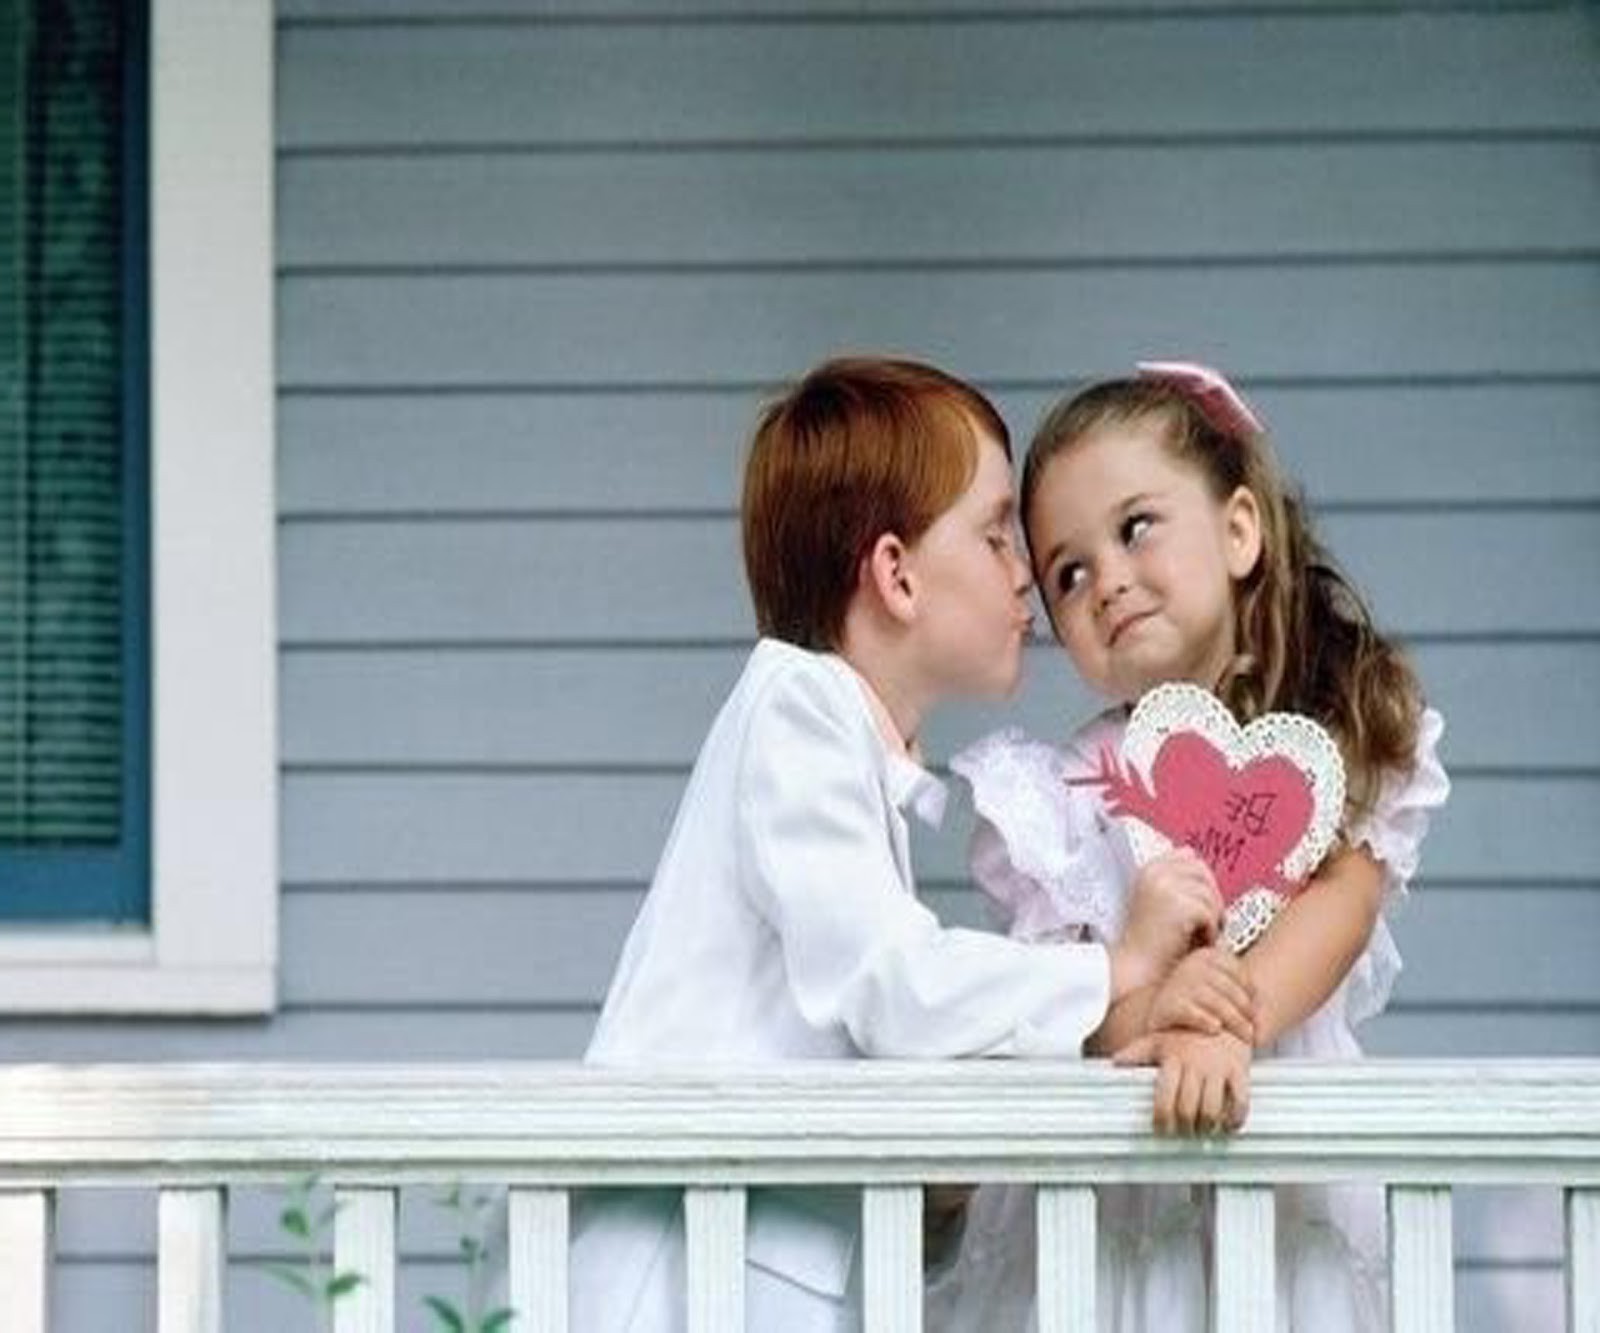 Child Love Couple Free Awesome Image For Mobile